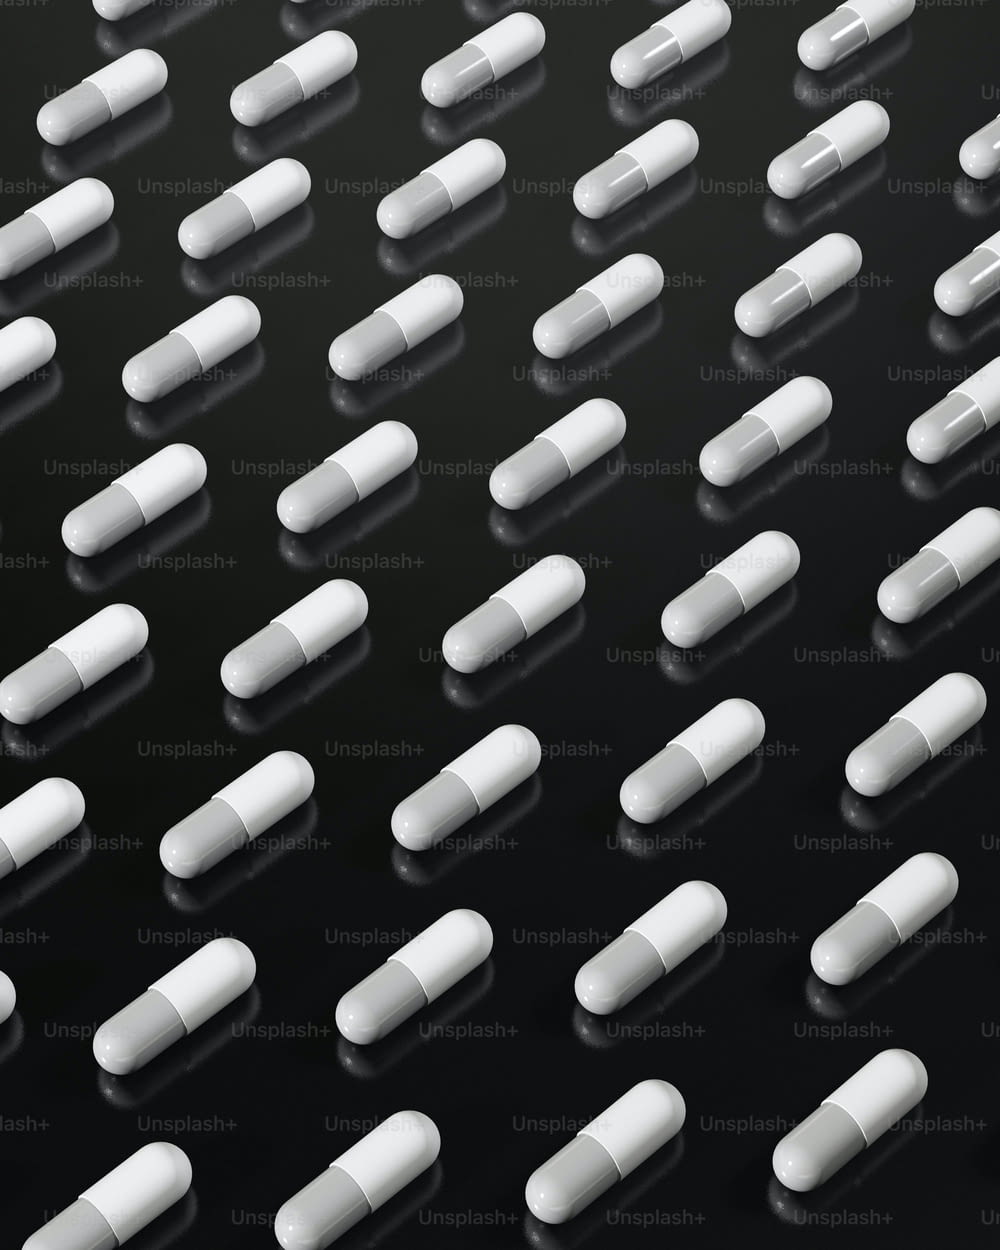 many white pills are arranged on a black surface